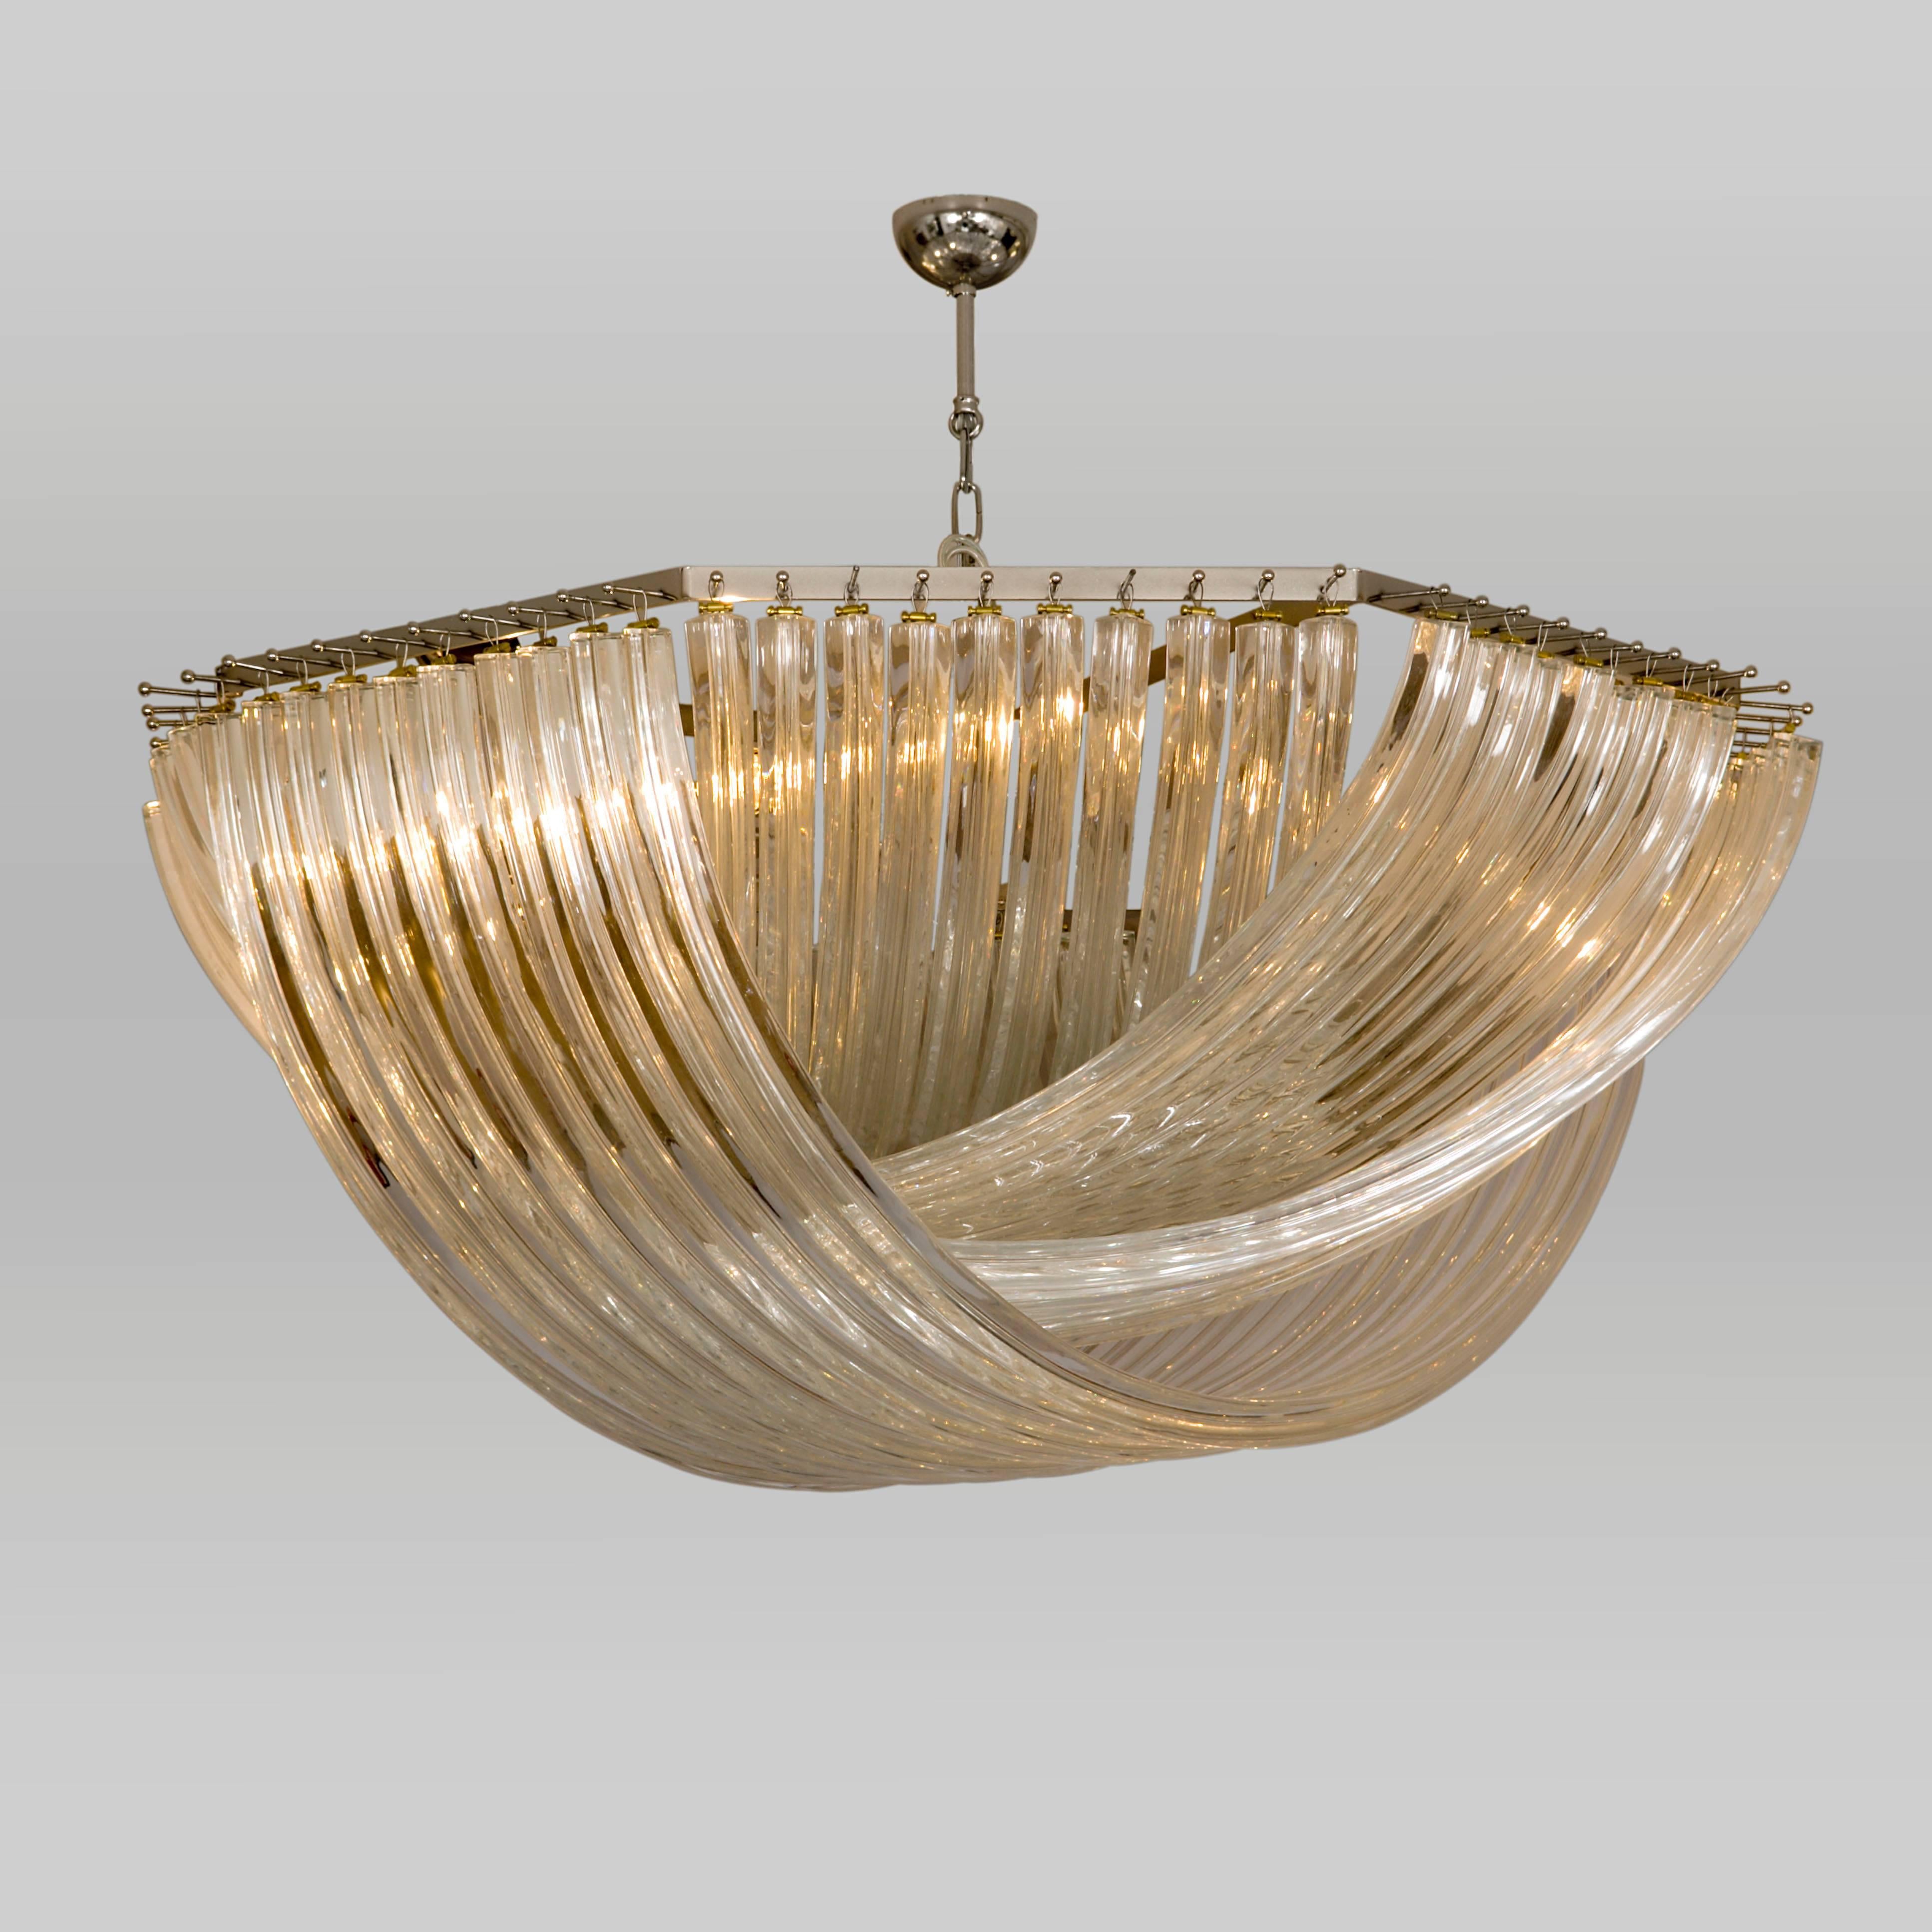 Dramatic and unusual Italian, 1970s-style chandelier using long curved glass rods to create a woven or liquid effect.